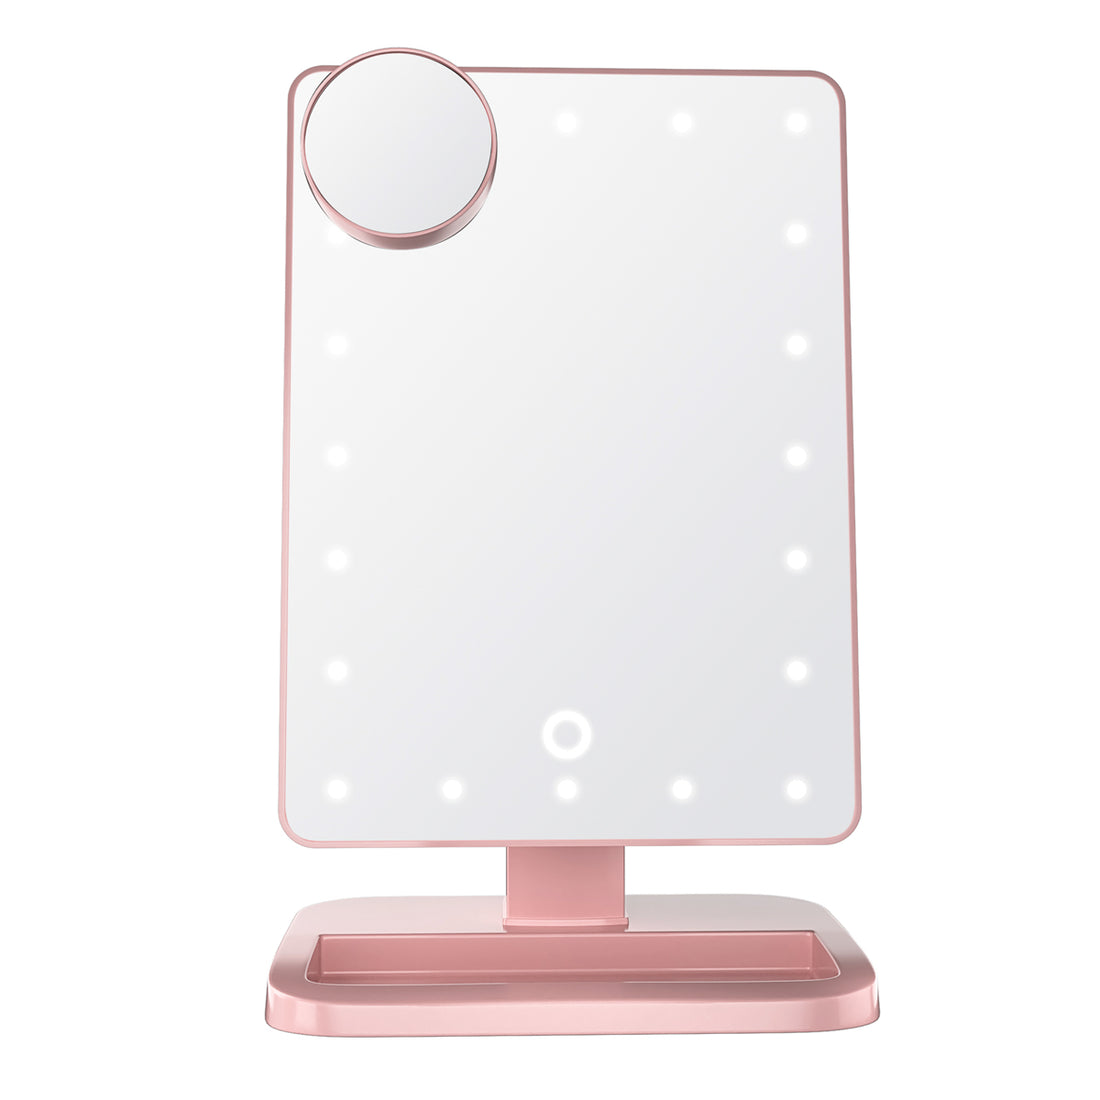 Touch Tablet Mini Tri-Tone LED Makeup Mirror • Impressions Vanity Co.